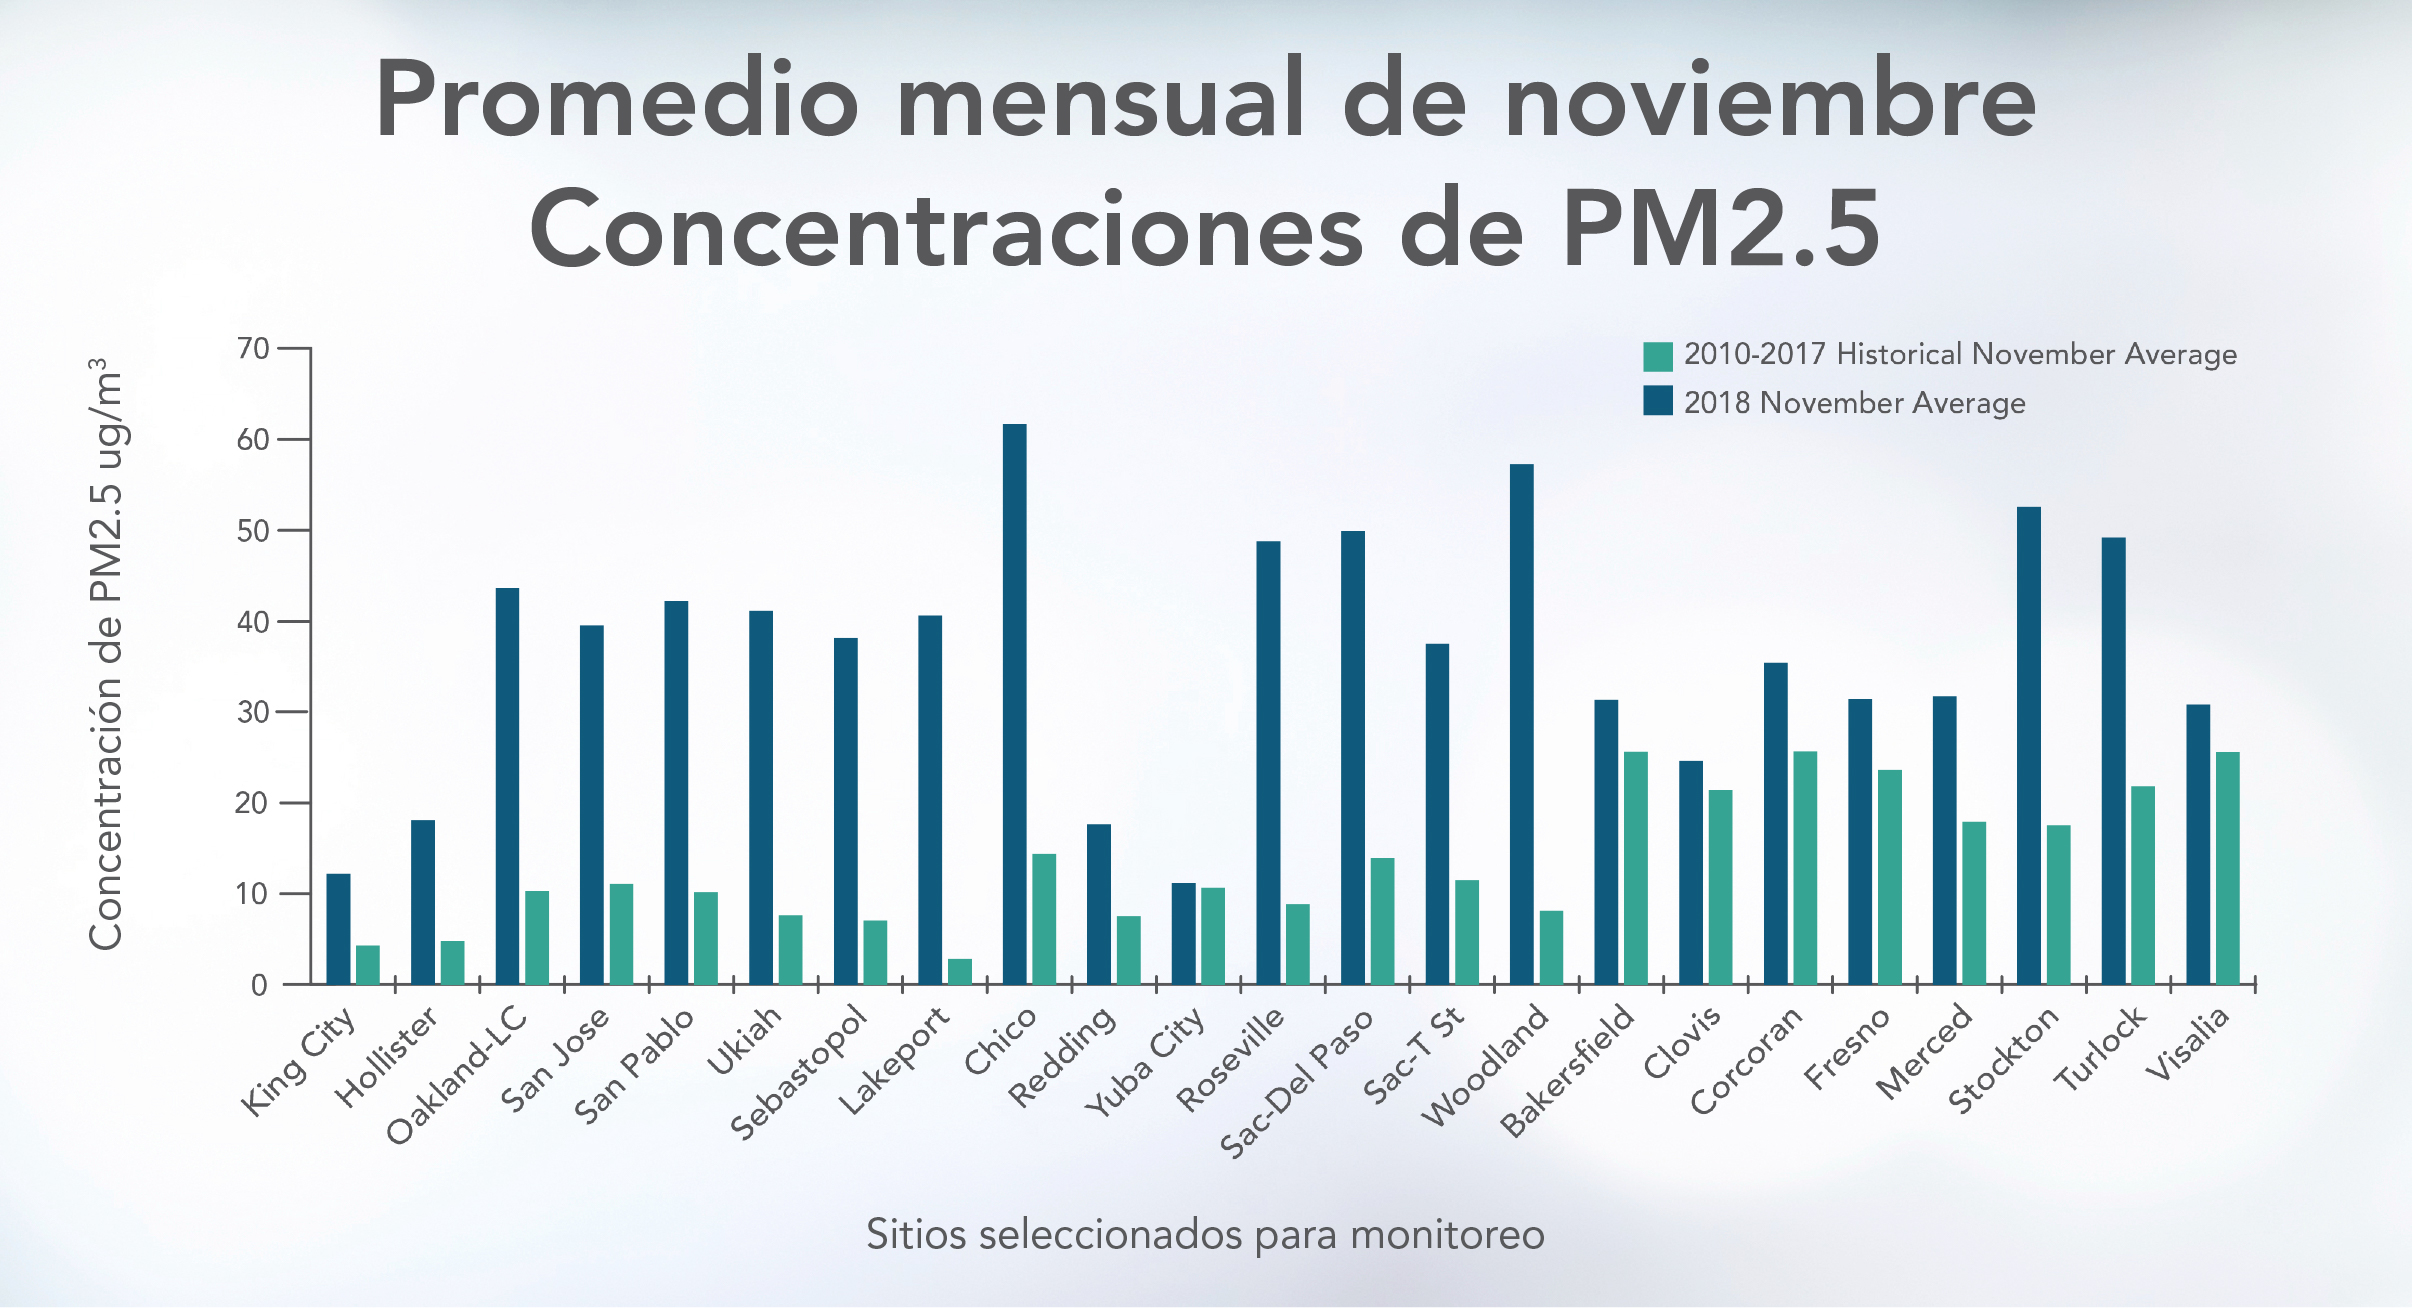 Chart showing the average monthly concentrations of fine particulate matter (PM2.5) at 23 monitoring sites across California. The chart compares the 2018 November average for each site to the Historical November Average from 2010-2017. All monitoring sites show higher concentrations of PM2.5 in 2018, as compared to 2010-2017, with several in Northern California showing 2018 levels more than three times as high as the 2010-2017 levels.